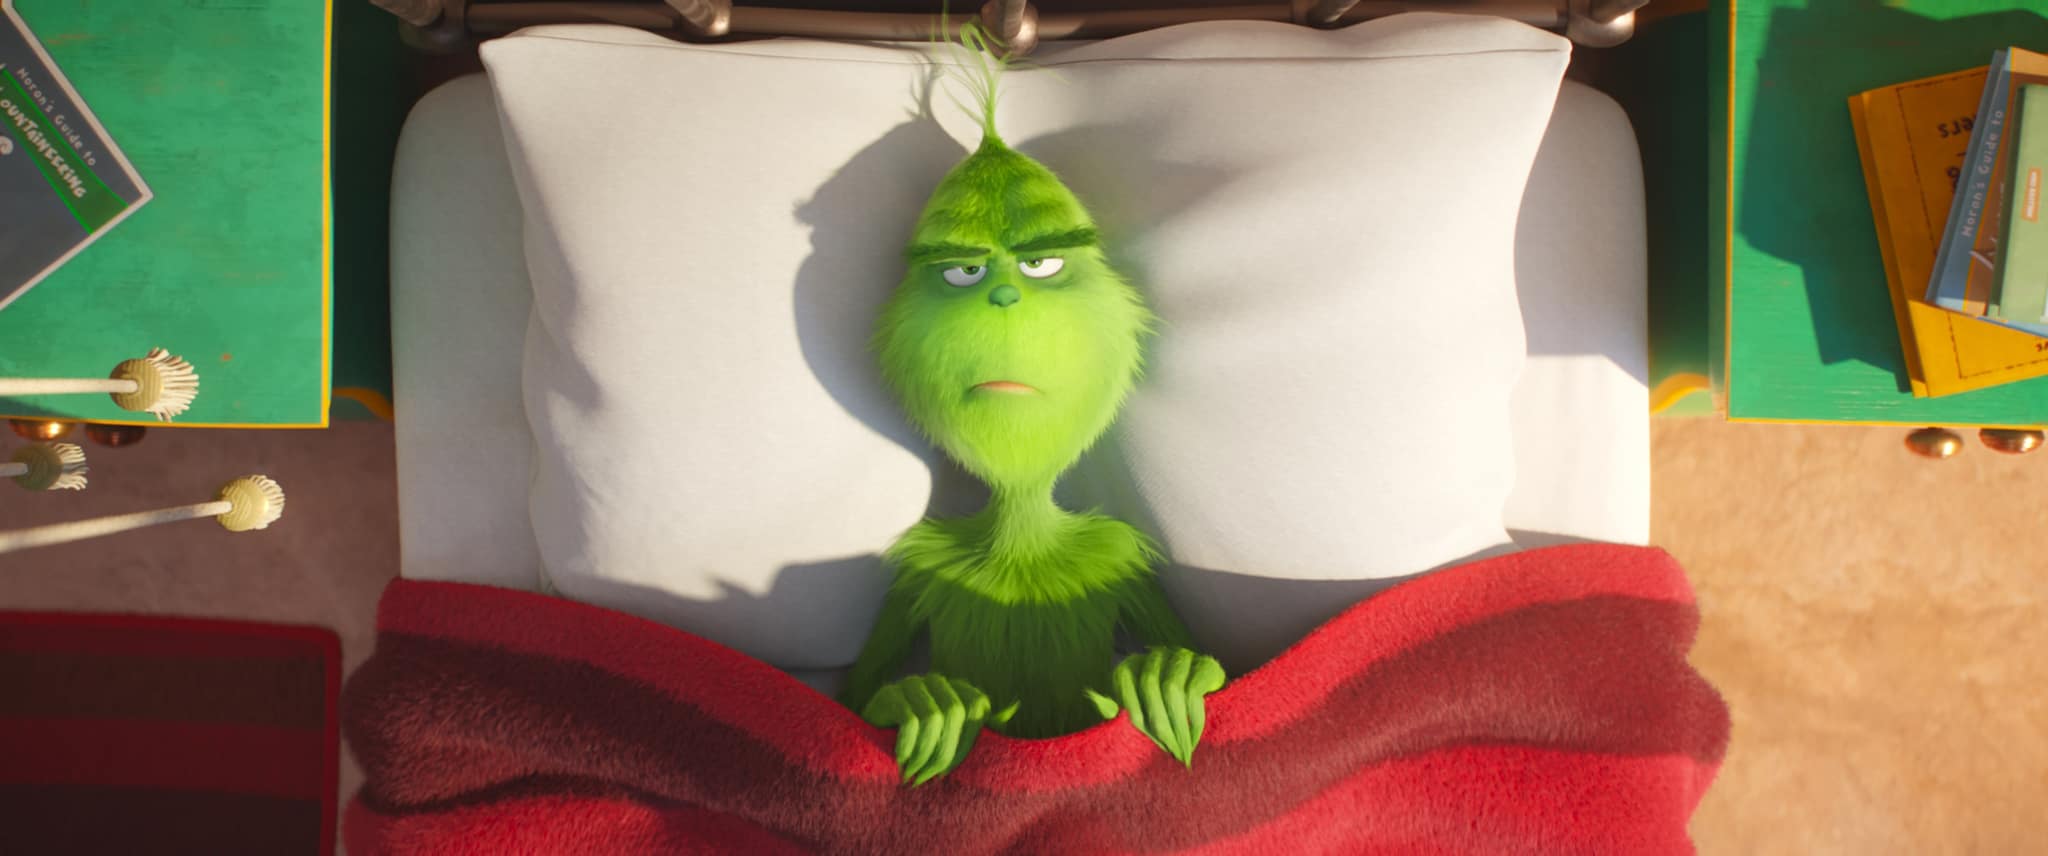 An animated Grinch in a red and green bedroom in this image from Universal Pictures.